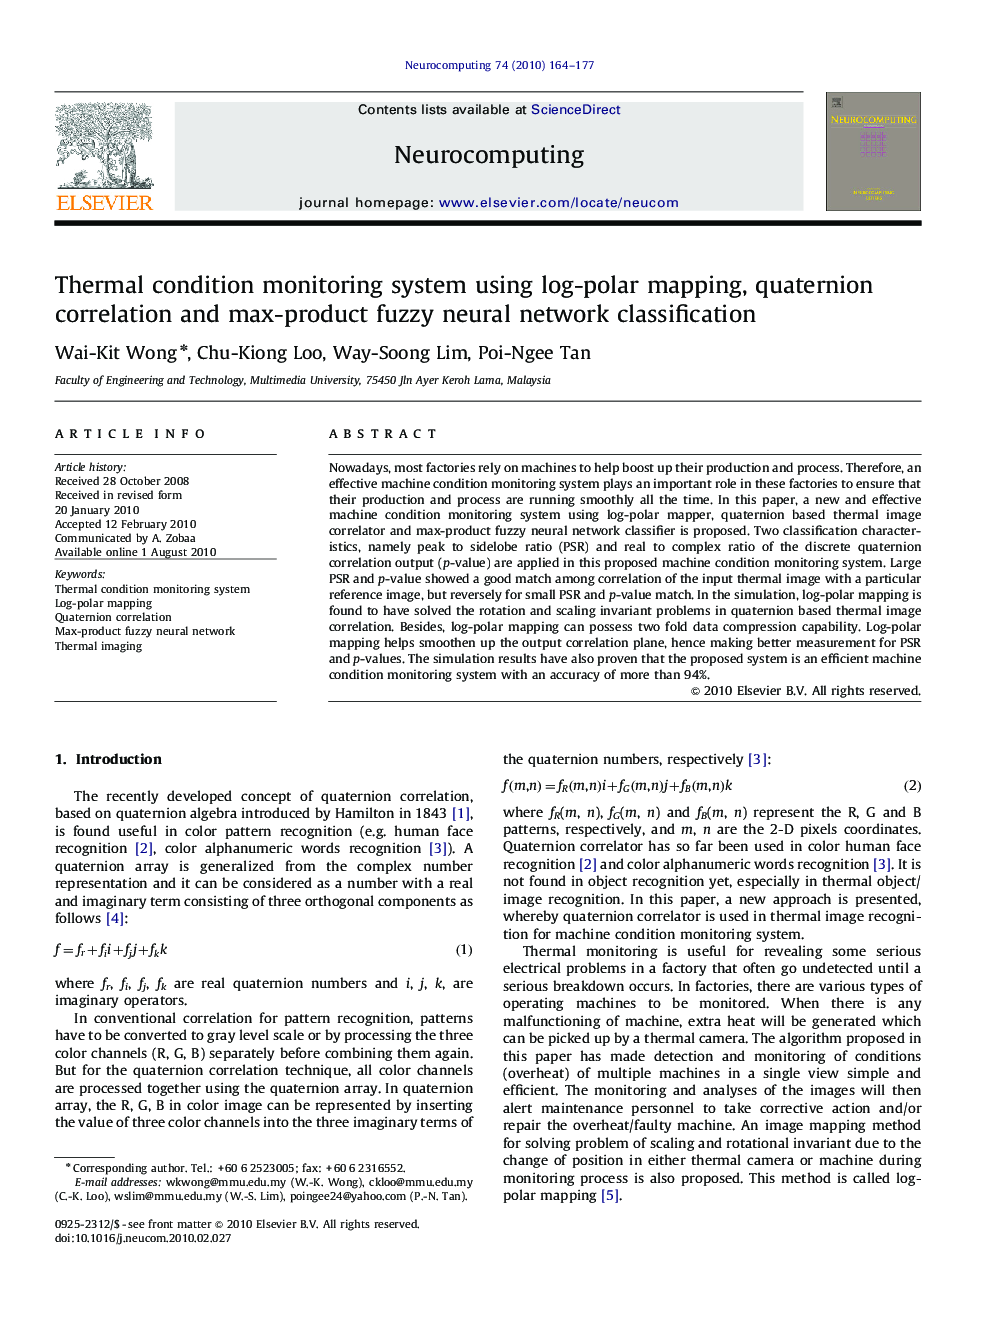 Thermal condition monitoring system using log-polar mapping, quaternion correlation and max-product fuzzy neural network classification